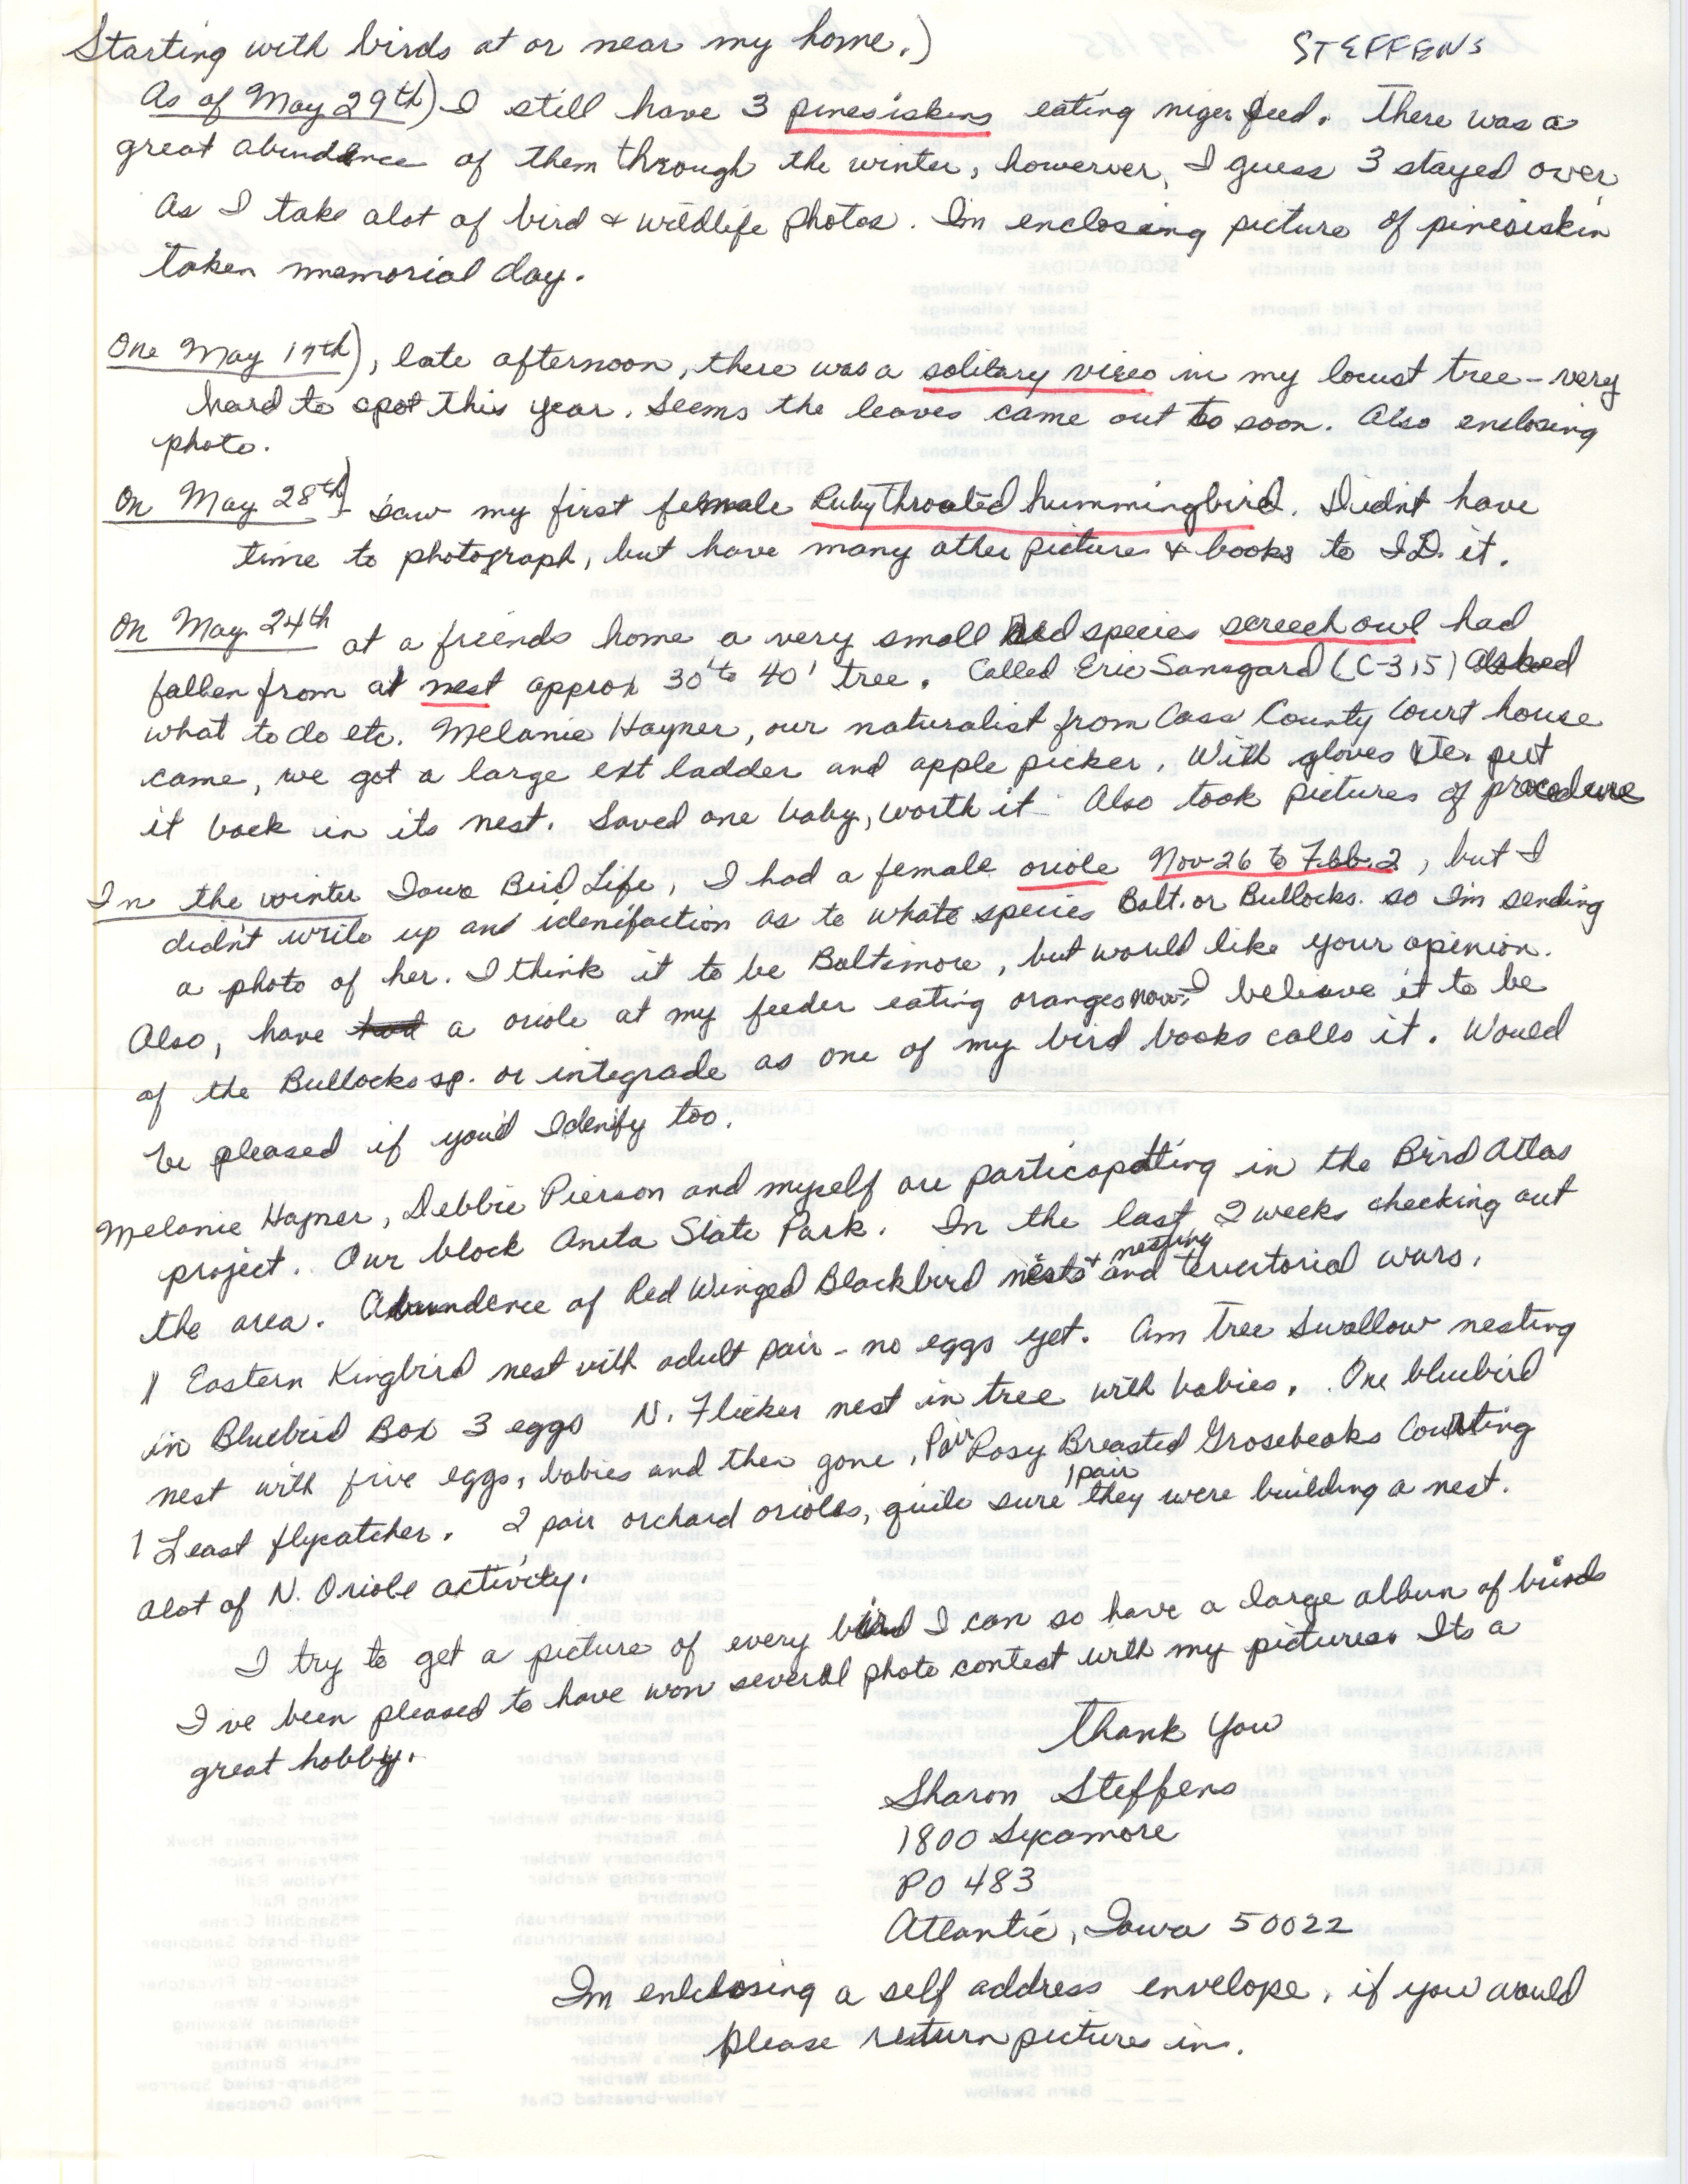 Sharon Steffens letter to Thomas H. Kent with incorporated field notes, May 29, 1985